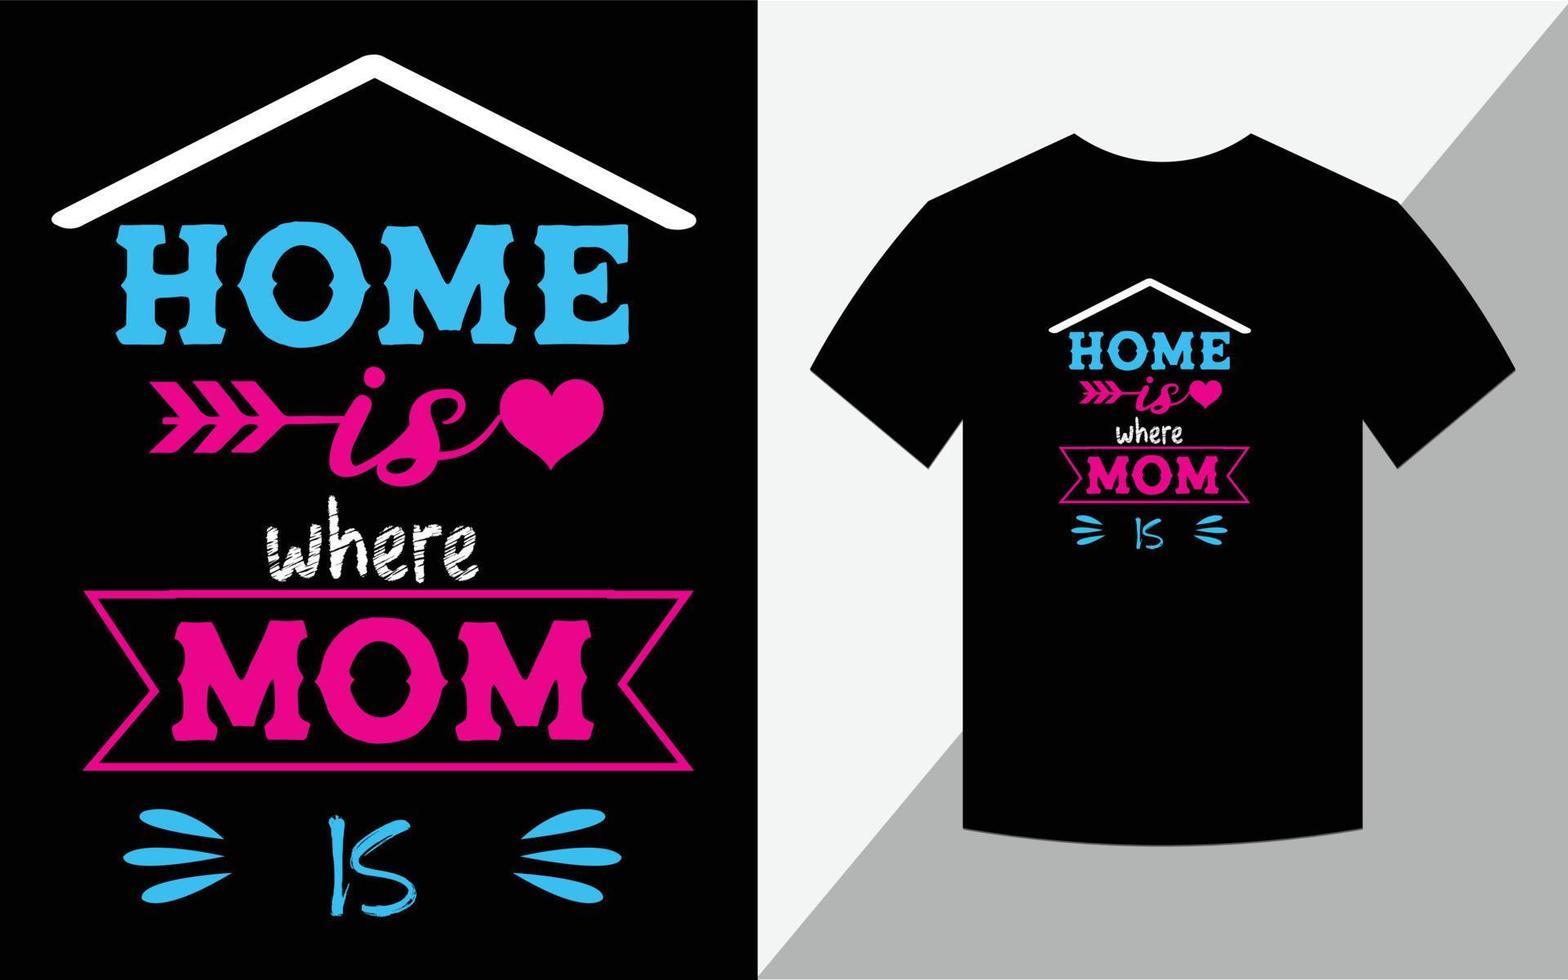 Home is where mom is, Mother's day T-shirt design vector